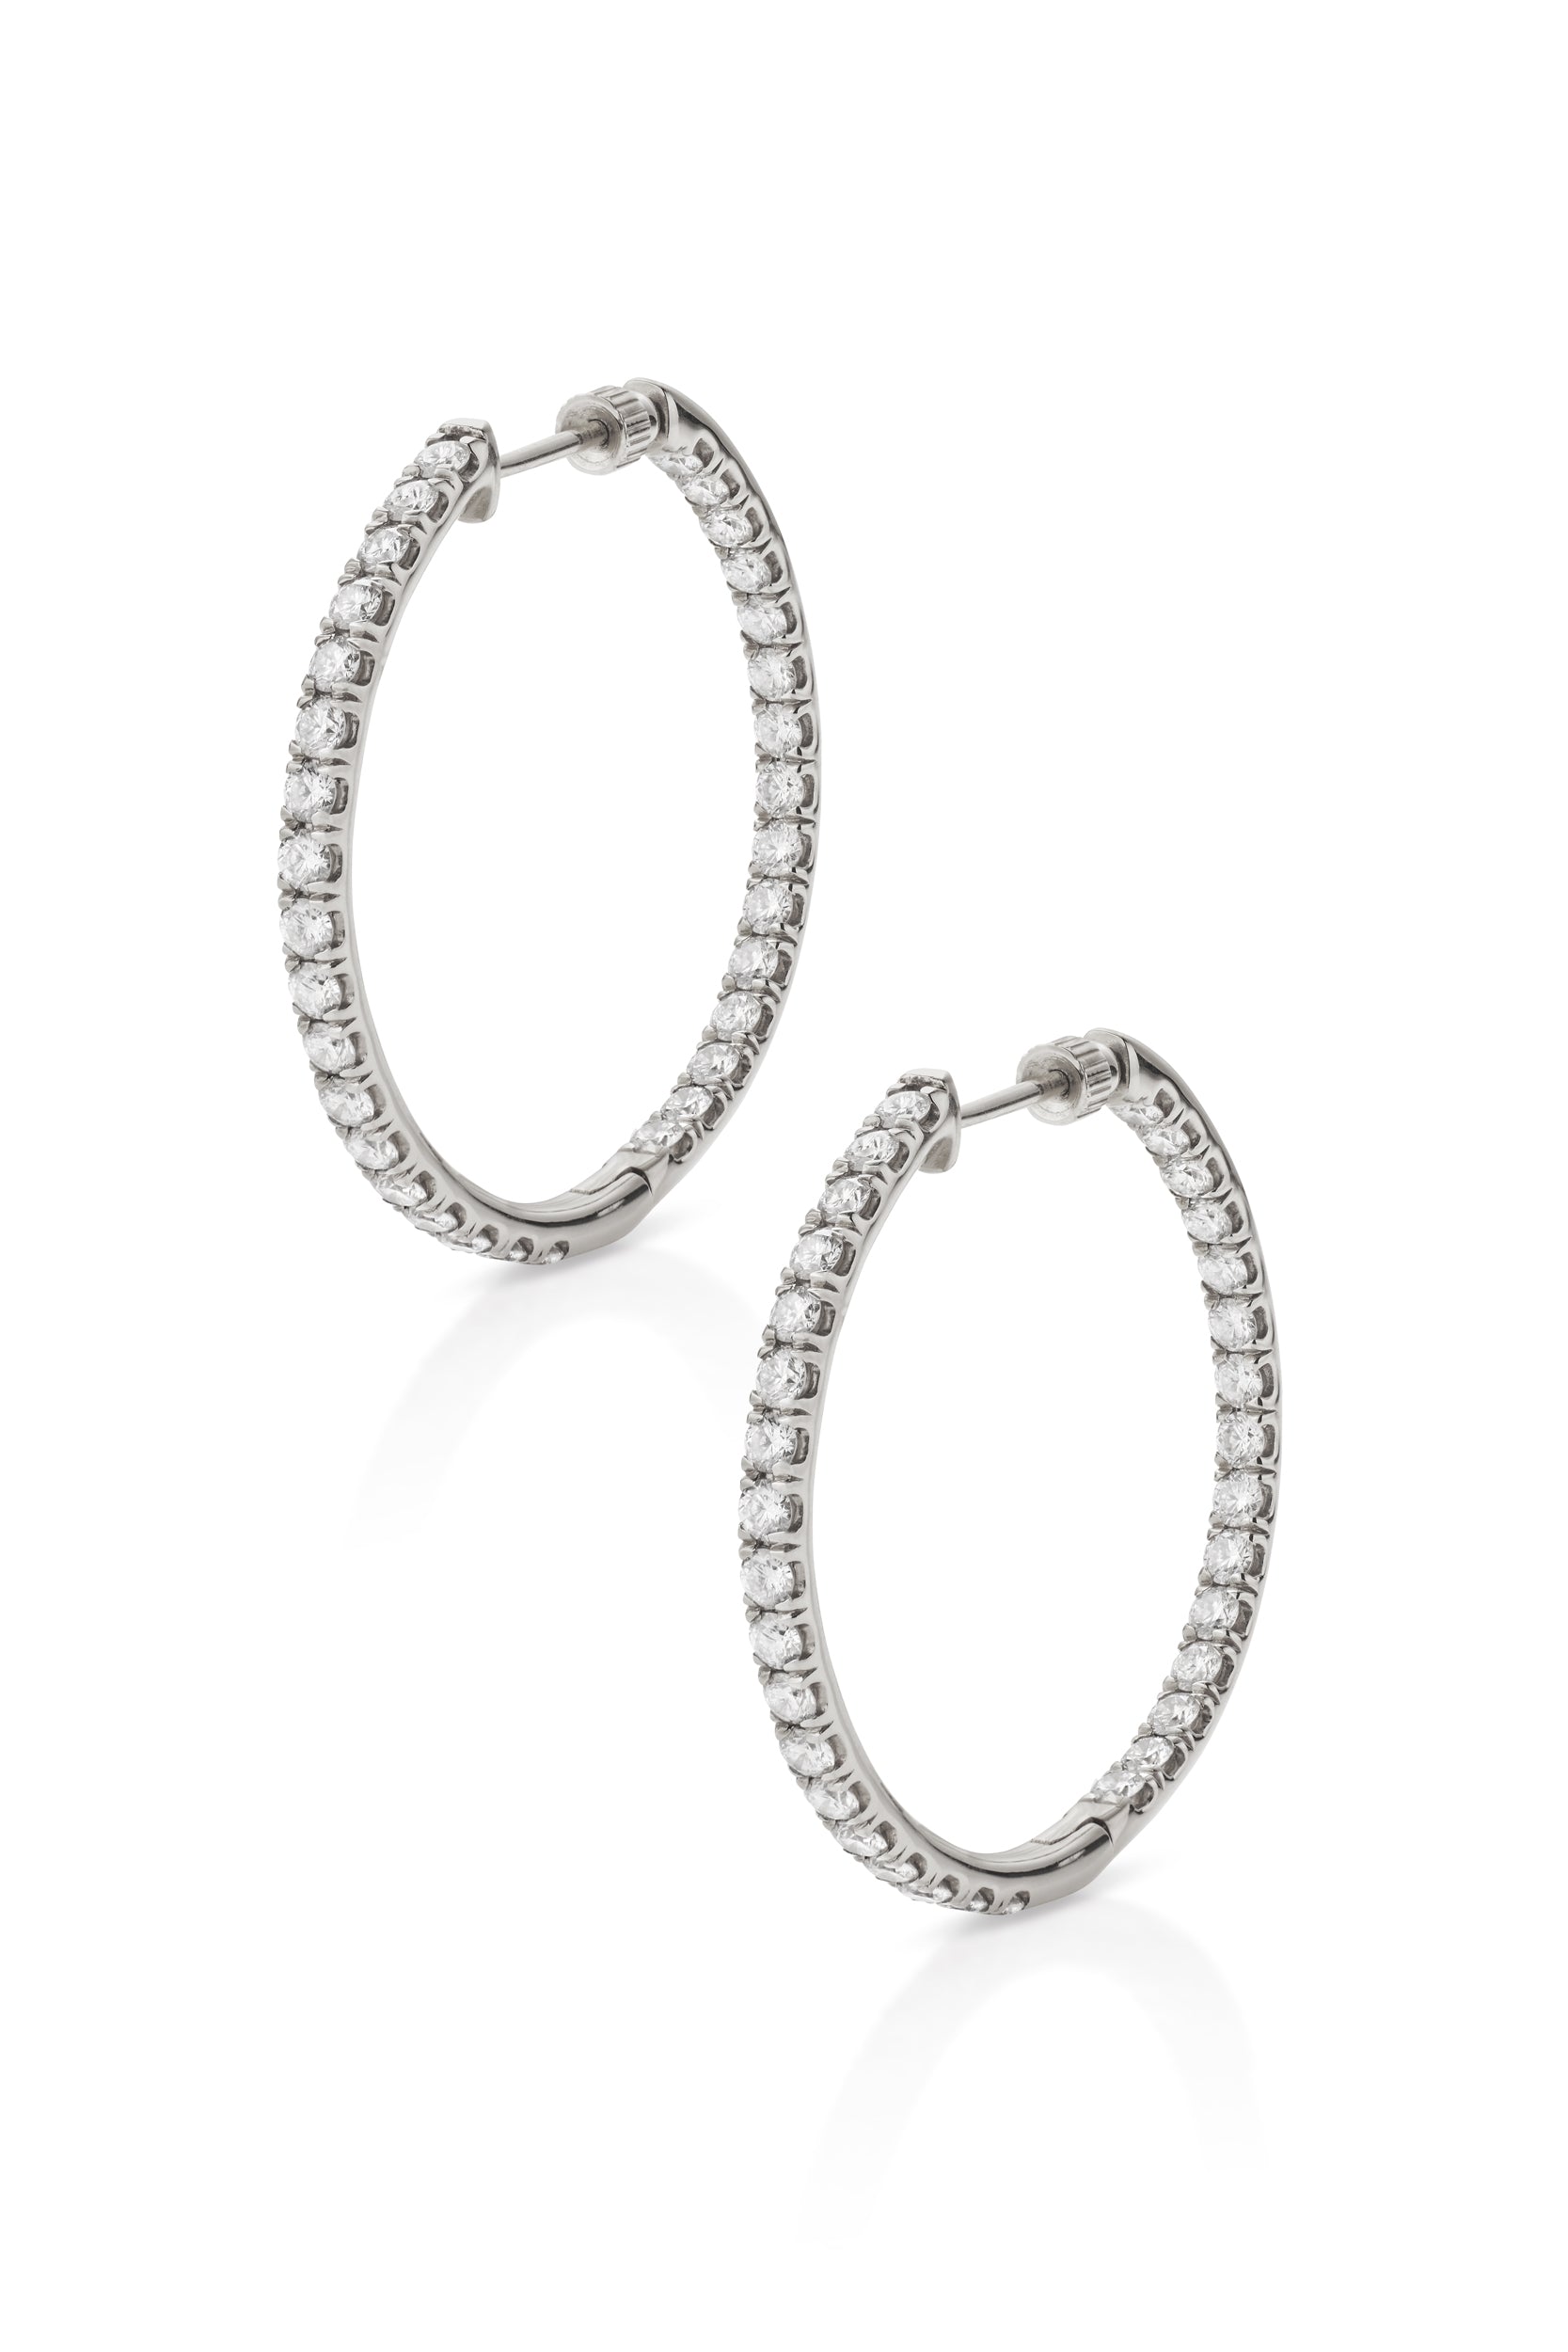 14K White Gold French Pave 30mm Round Inside Out Diamond Hoop Earrings